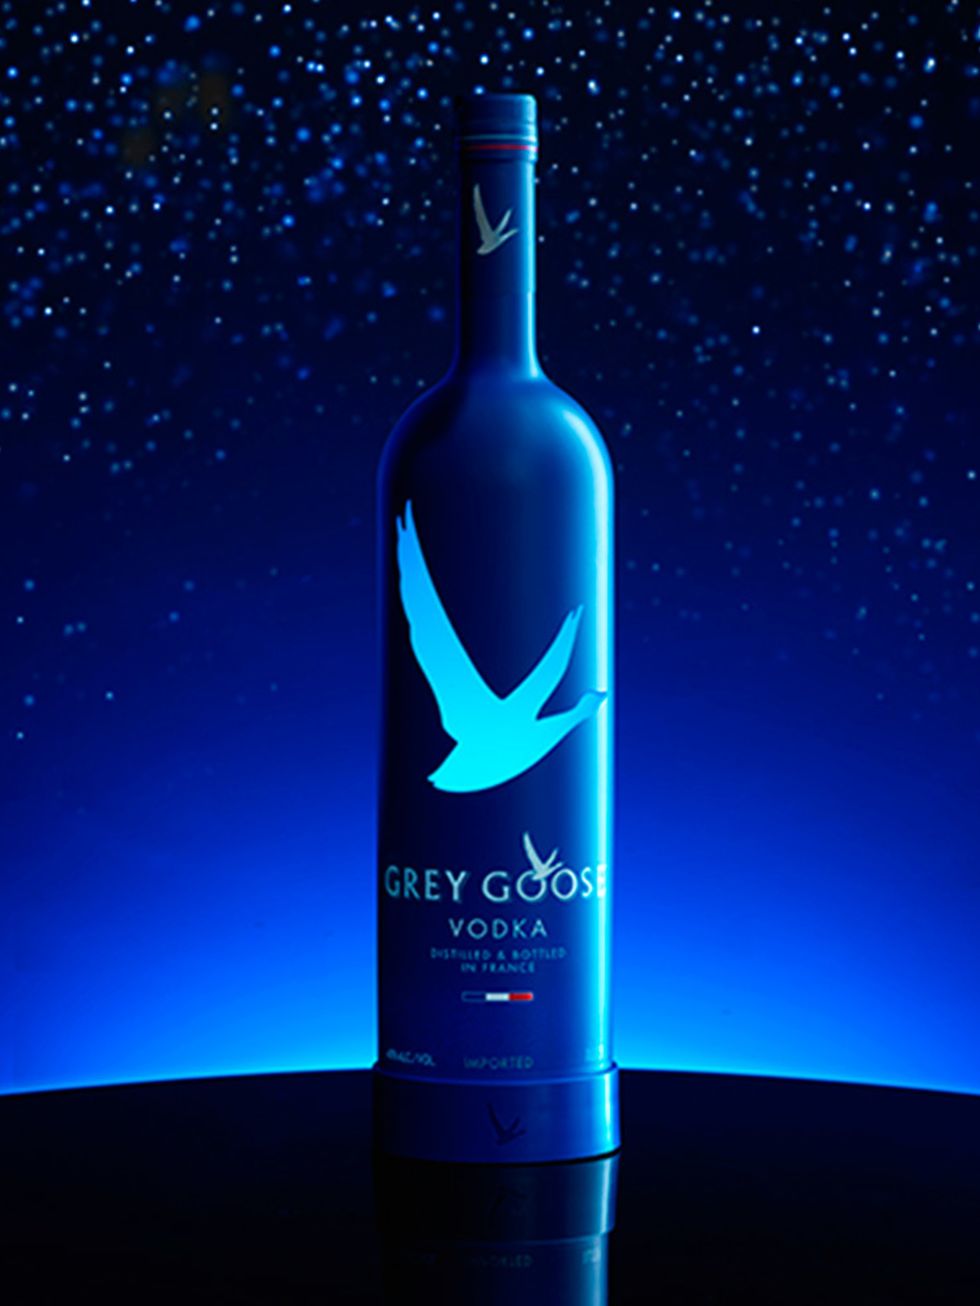 <p><strong>EVENT: GREY GOOSE LA NUITE DES ETOILES </strong></p>

<p>On 4 September Grey Goose will be providing the entertainment for the Elton John AIDS Foundation Woodside End of Summer Party in the grounds of Elton Johns and David Furnishs Windsor 